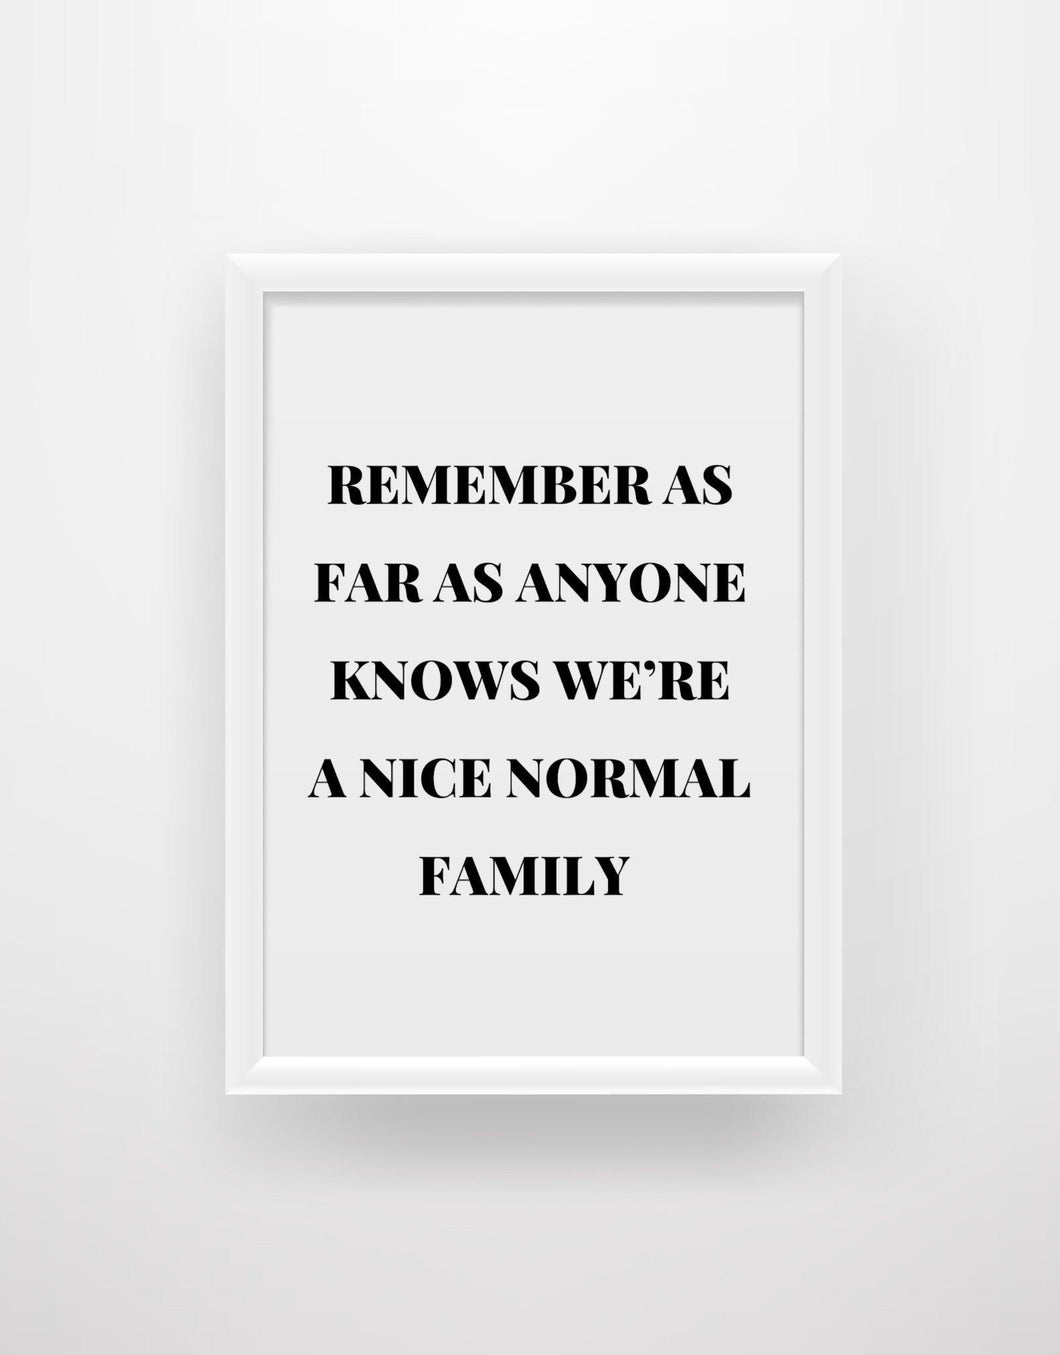 Remember as far as anyone knows we’re a nice normal family - Chic Prints